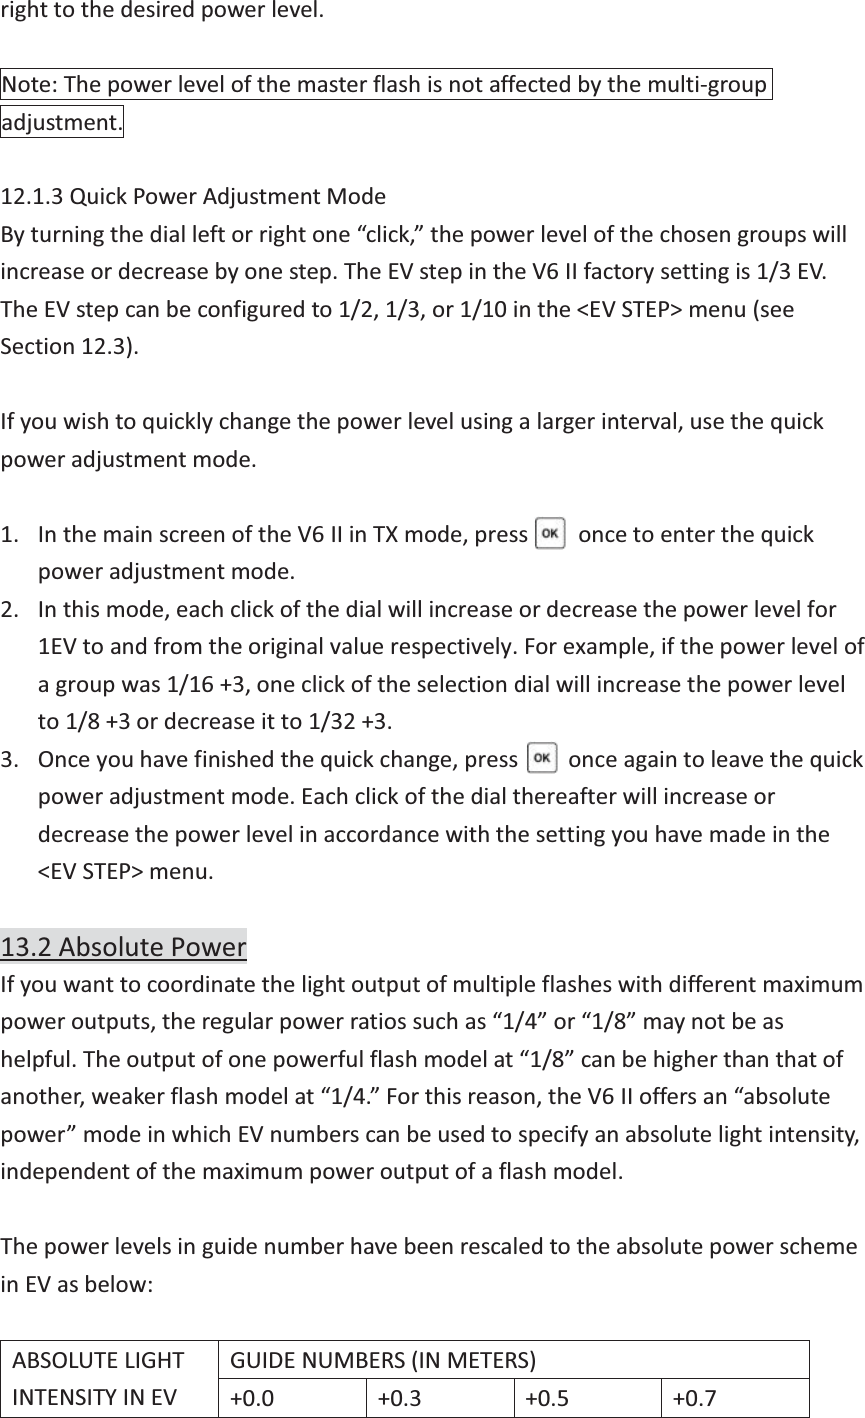 right to the desired power level.  Note: The power level of the master flash is not affected by the multi-group adjustment.  12.1.3 Quick Power Adjustment Mode By turning the dial left or right one “click,” the power level of the chosen groups will increase or decrease by one step. The EV step in the V6 II factory setting is 1/3 EV. The EV step can be configured to 1/2, 1/3, or 1/10 in the &lt;EV STEP&gt; menu (see Section 12.3).  If you wish to quickly change the power level using a larger interval, use the quick power adjustment mode.  1. In the main screen of the V6 II in TX mode, press     once to enter the quick power adjustment mode.   2. In this mode, each click of the dial will increase or decrease the power level for 1EV to and from the original value respectively. For example, if the power level of a group was 1/16 +3, one click of the selection dial will increase the power level to 1/8 +3 or decrease it to 1/32 +3. 3. Once you have finished the quick change, press      once again to leave the quick power adjustment mode. Each click of the dial thereafter will increase or decrease the power level in accordance with the setting you have made in the &lt;EV STEP&gt; menu.  13.2 Absolute Power If you want to coordinate the light output of multiple flashes with different maximum power outputs, the regular power ratios such as “1/4” or “1/8” may not be as helpful. The output of one powerful flash model at “1/8” can be higher than that of another, weaker flash model at “1/4.” For this reason, the V6 II offers an “absolute power” mode in which EV numbers can be used to specify an absolute light intensity, independent of the maximum power output of a flash model.  The power levels in guide number have been rescaled to the absolute power scheme in EV as below:  ABSOLUTE LIGHT INTENSITY IN EV GUIDE NUMBERS (IN METERS) +0.0 +0.3 +0.5 +0.7 